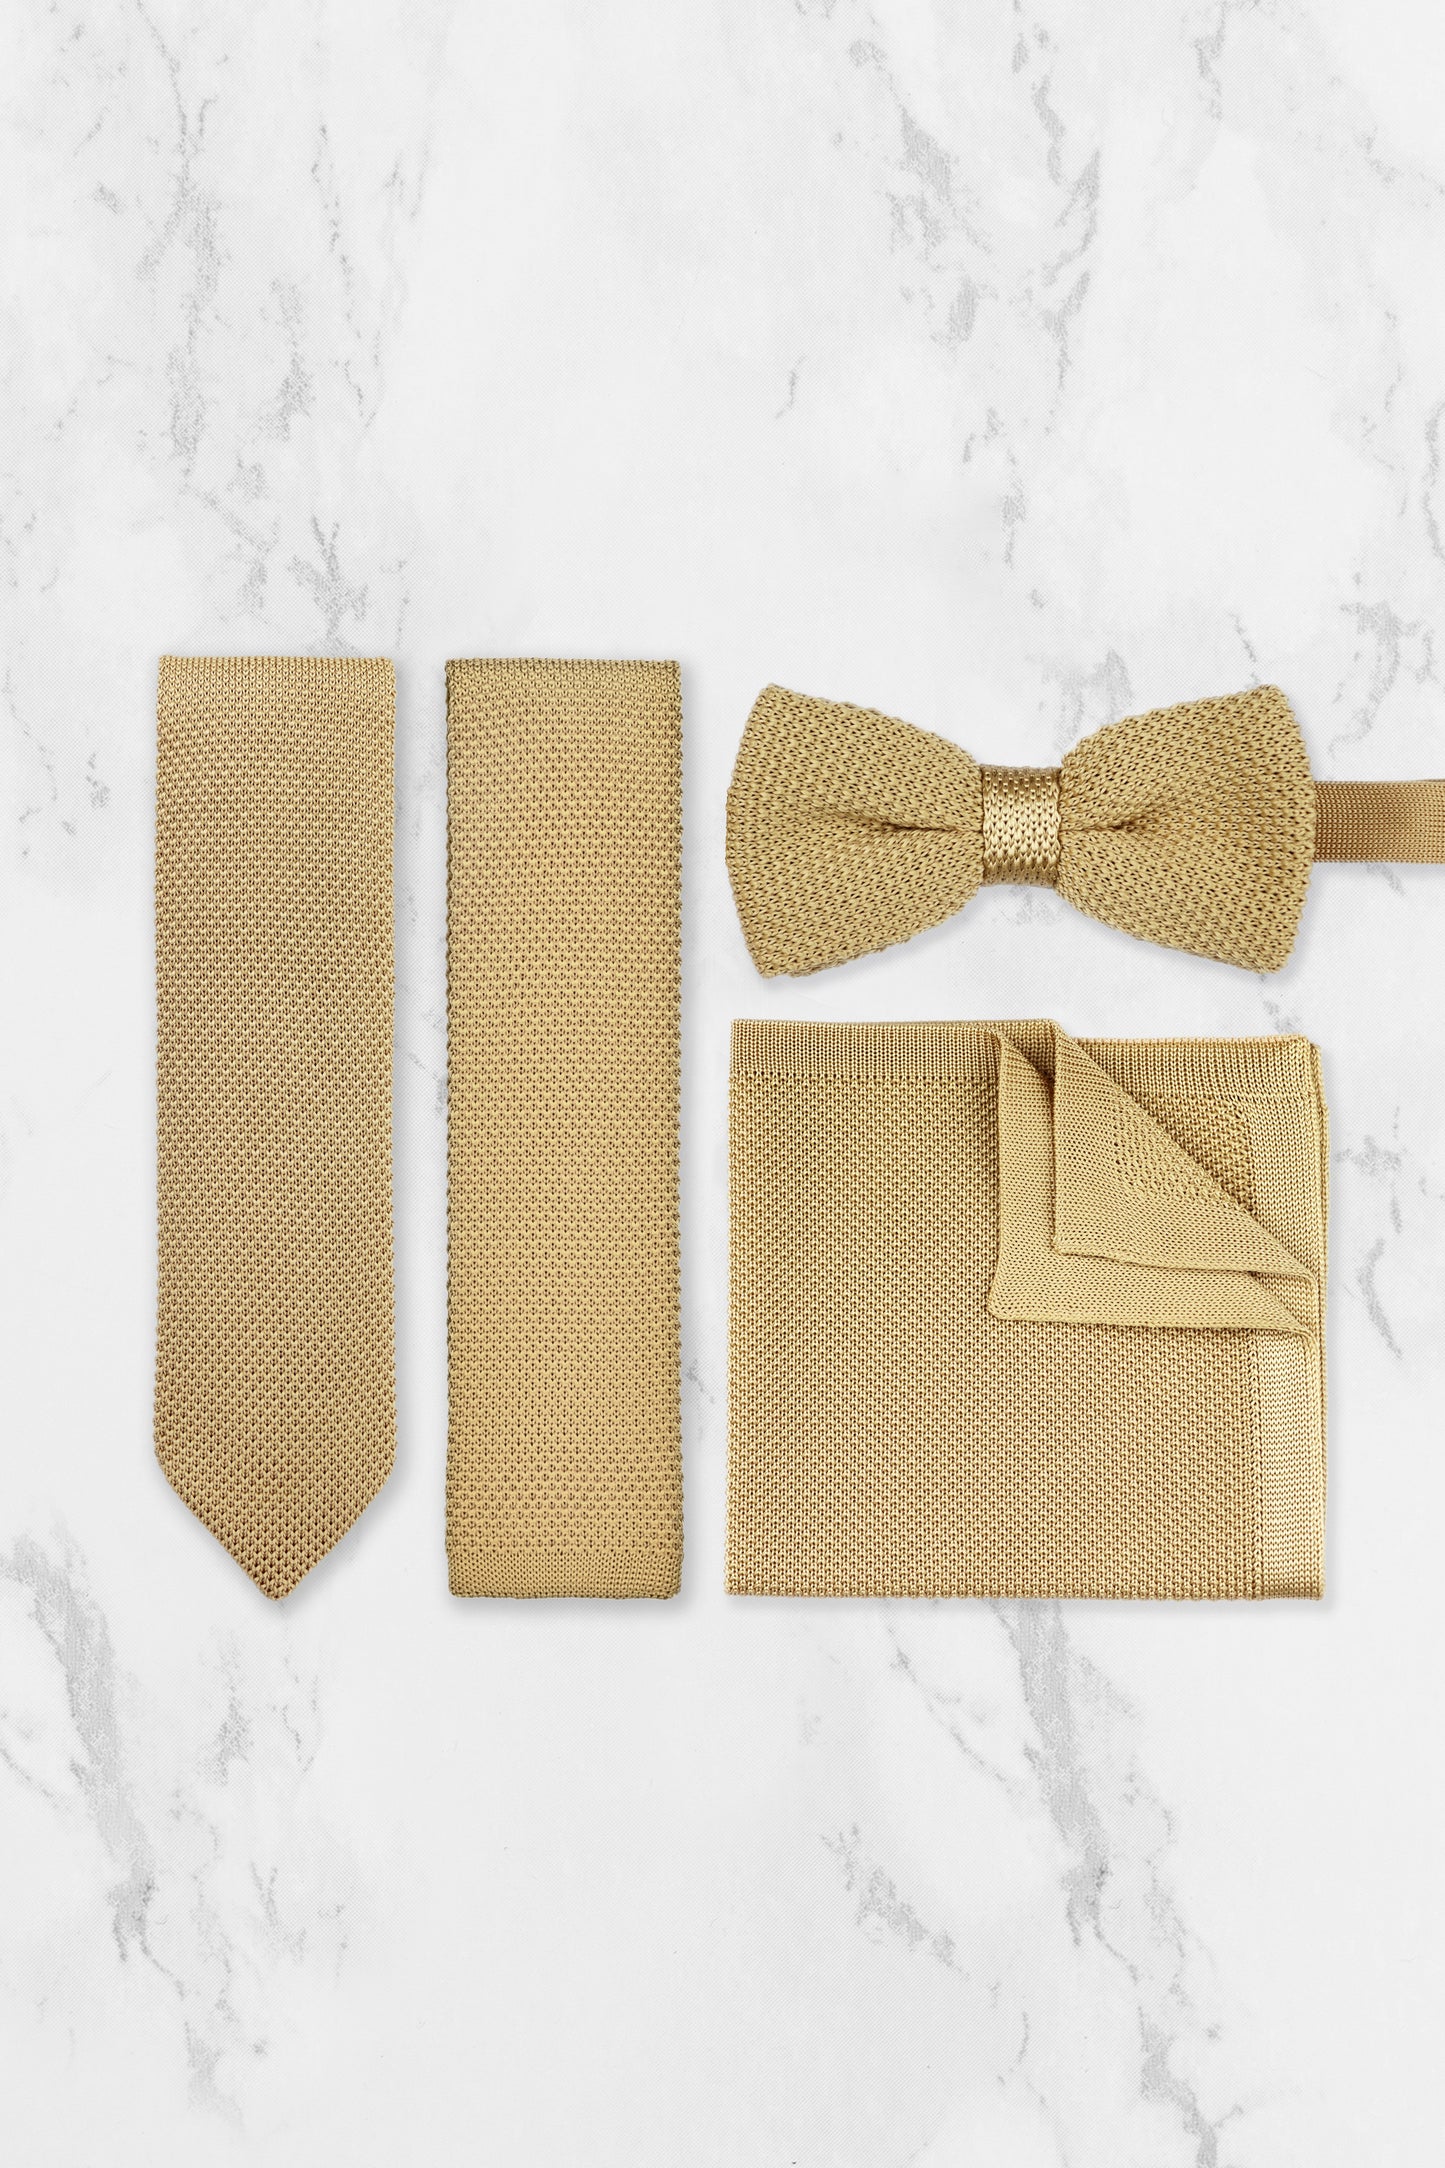 100% Polyester Square End Knitted Tie - Beige